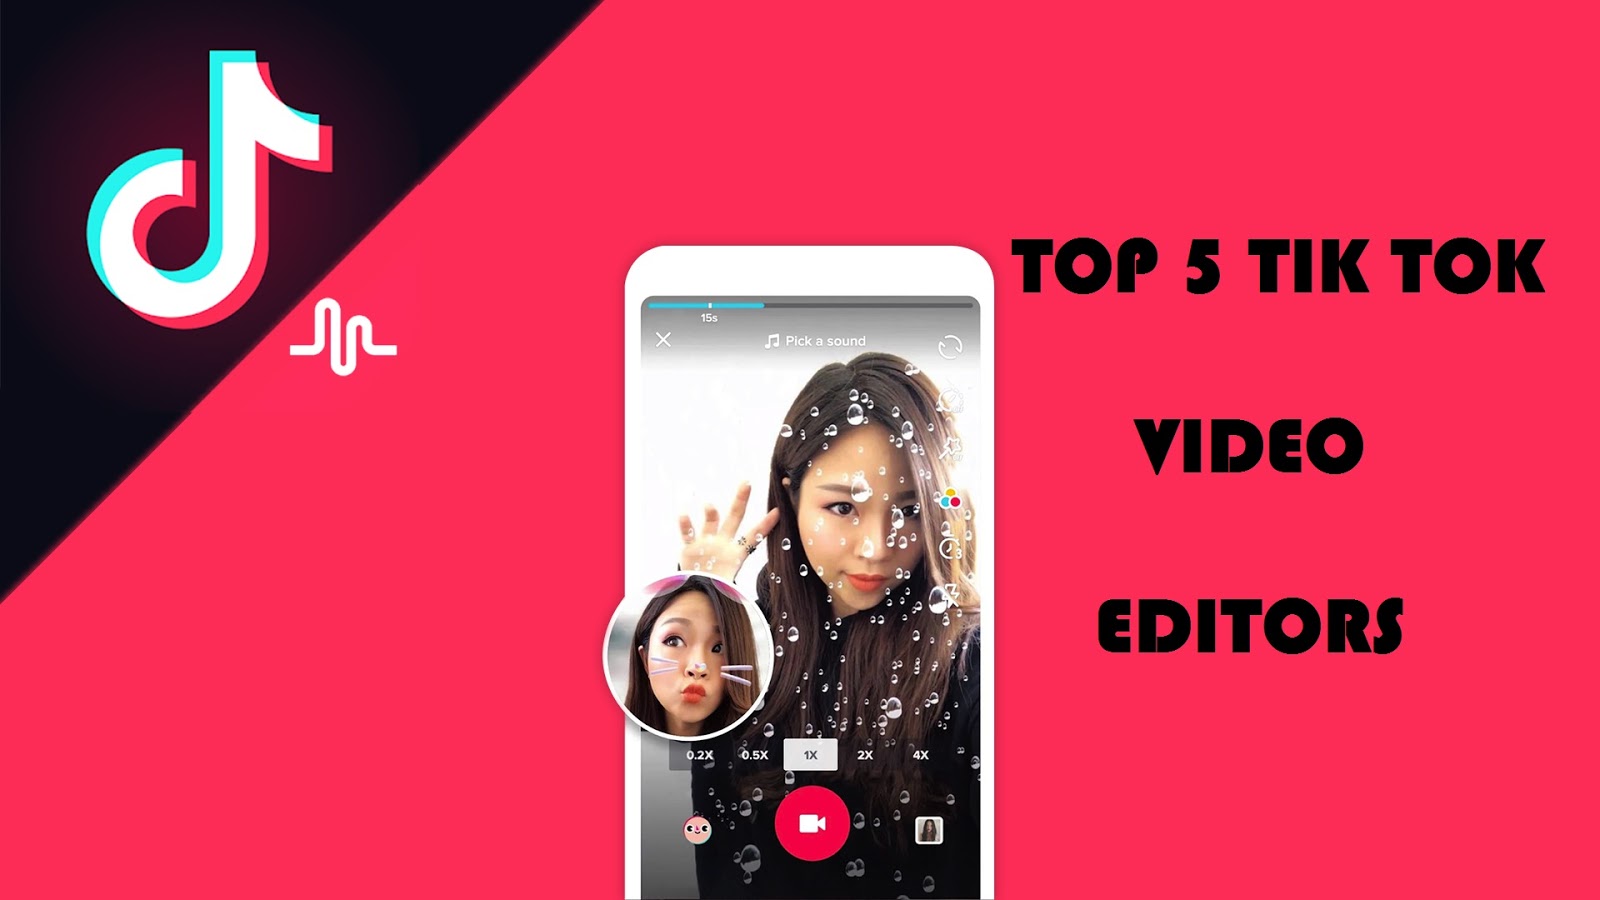 √ Top 5 Tik Tok Video Editing Apps For Android or iPhone 2020